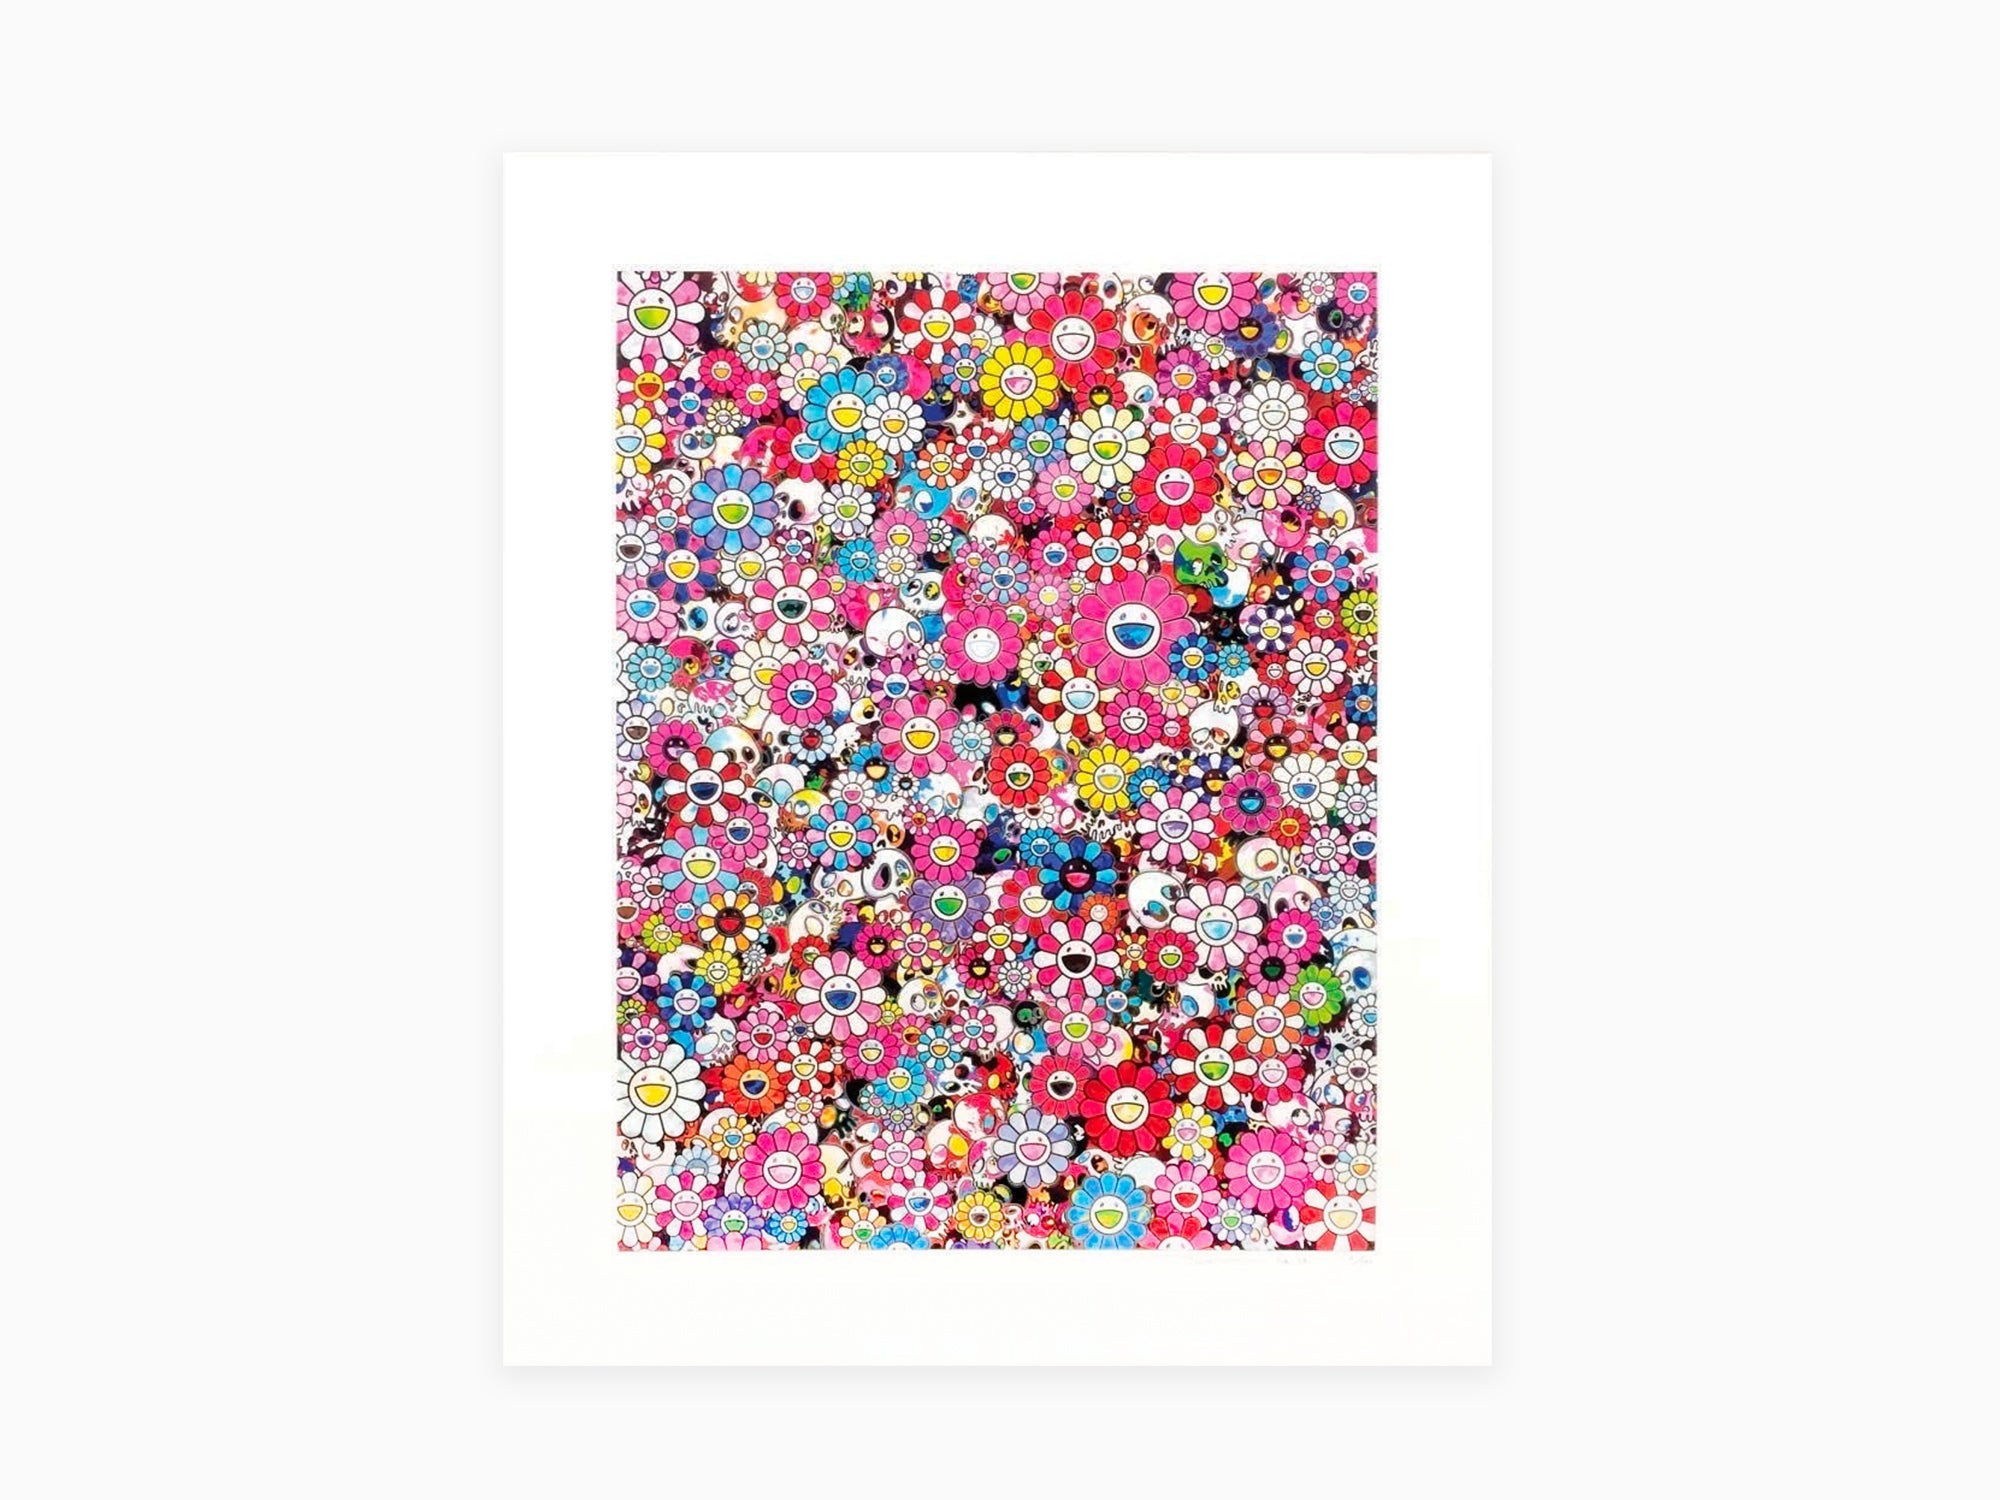 Takashi Murakami - Dazzling Circus : Embrace Peace and Darkness within Thy Heart